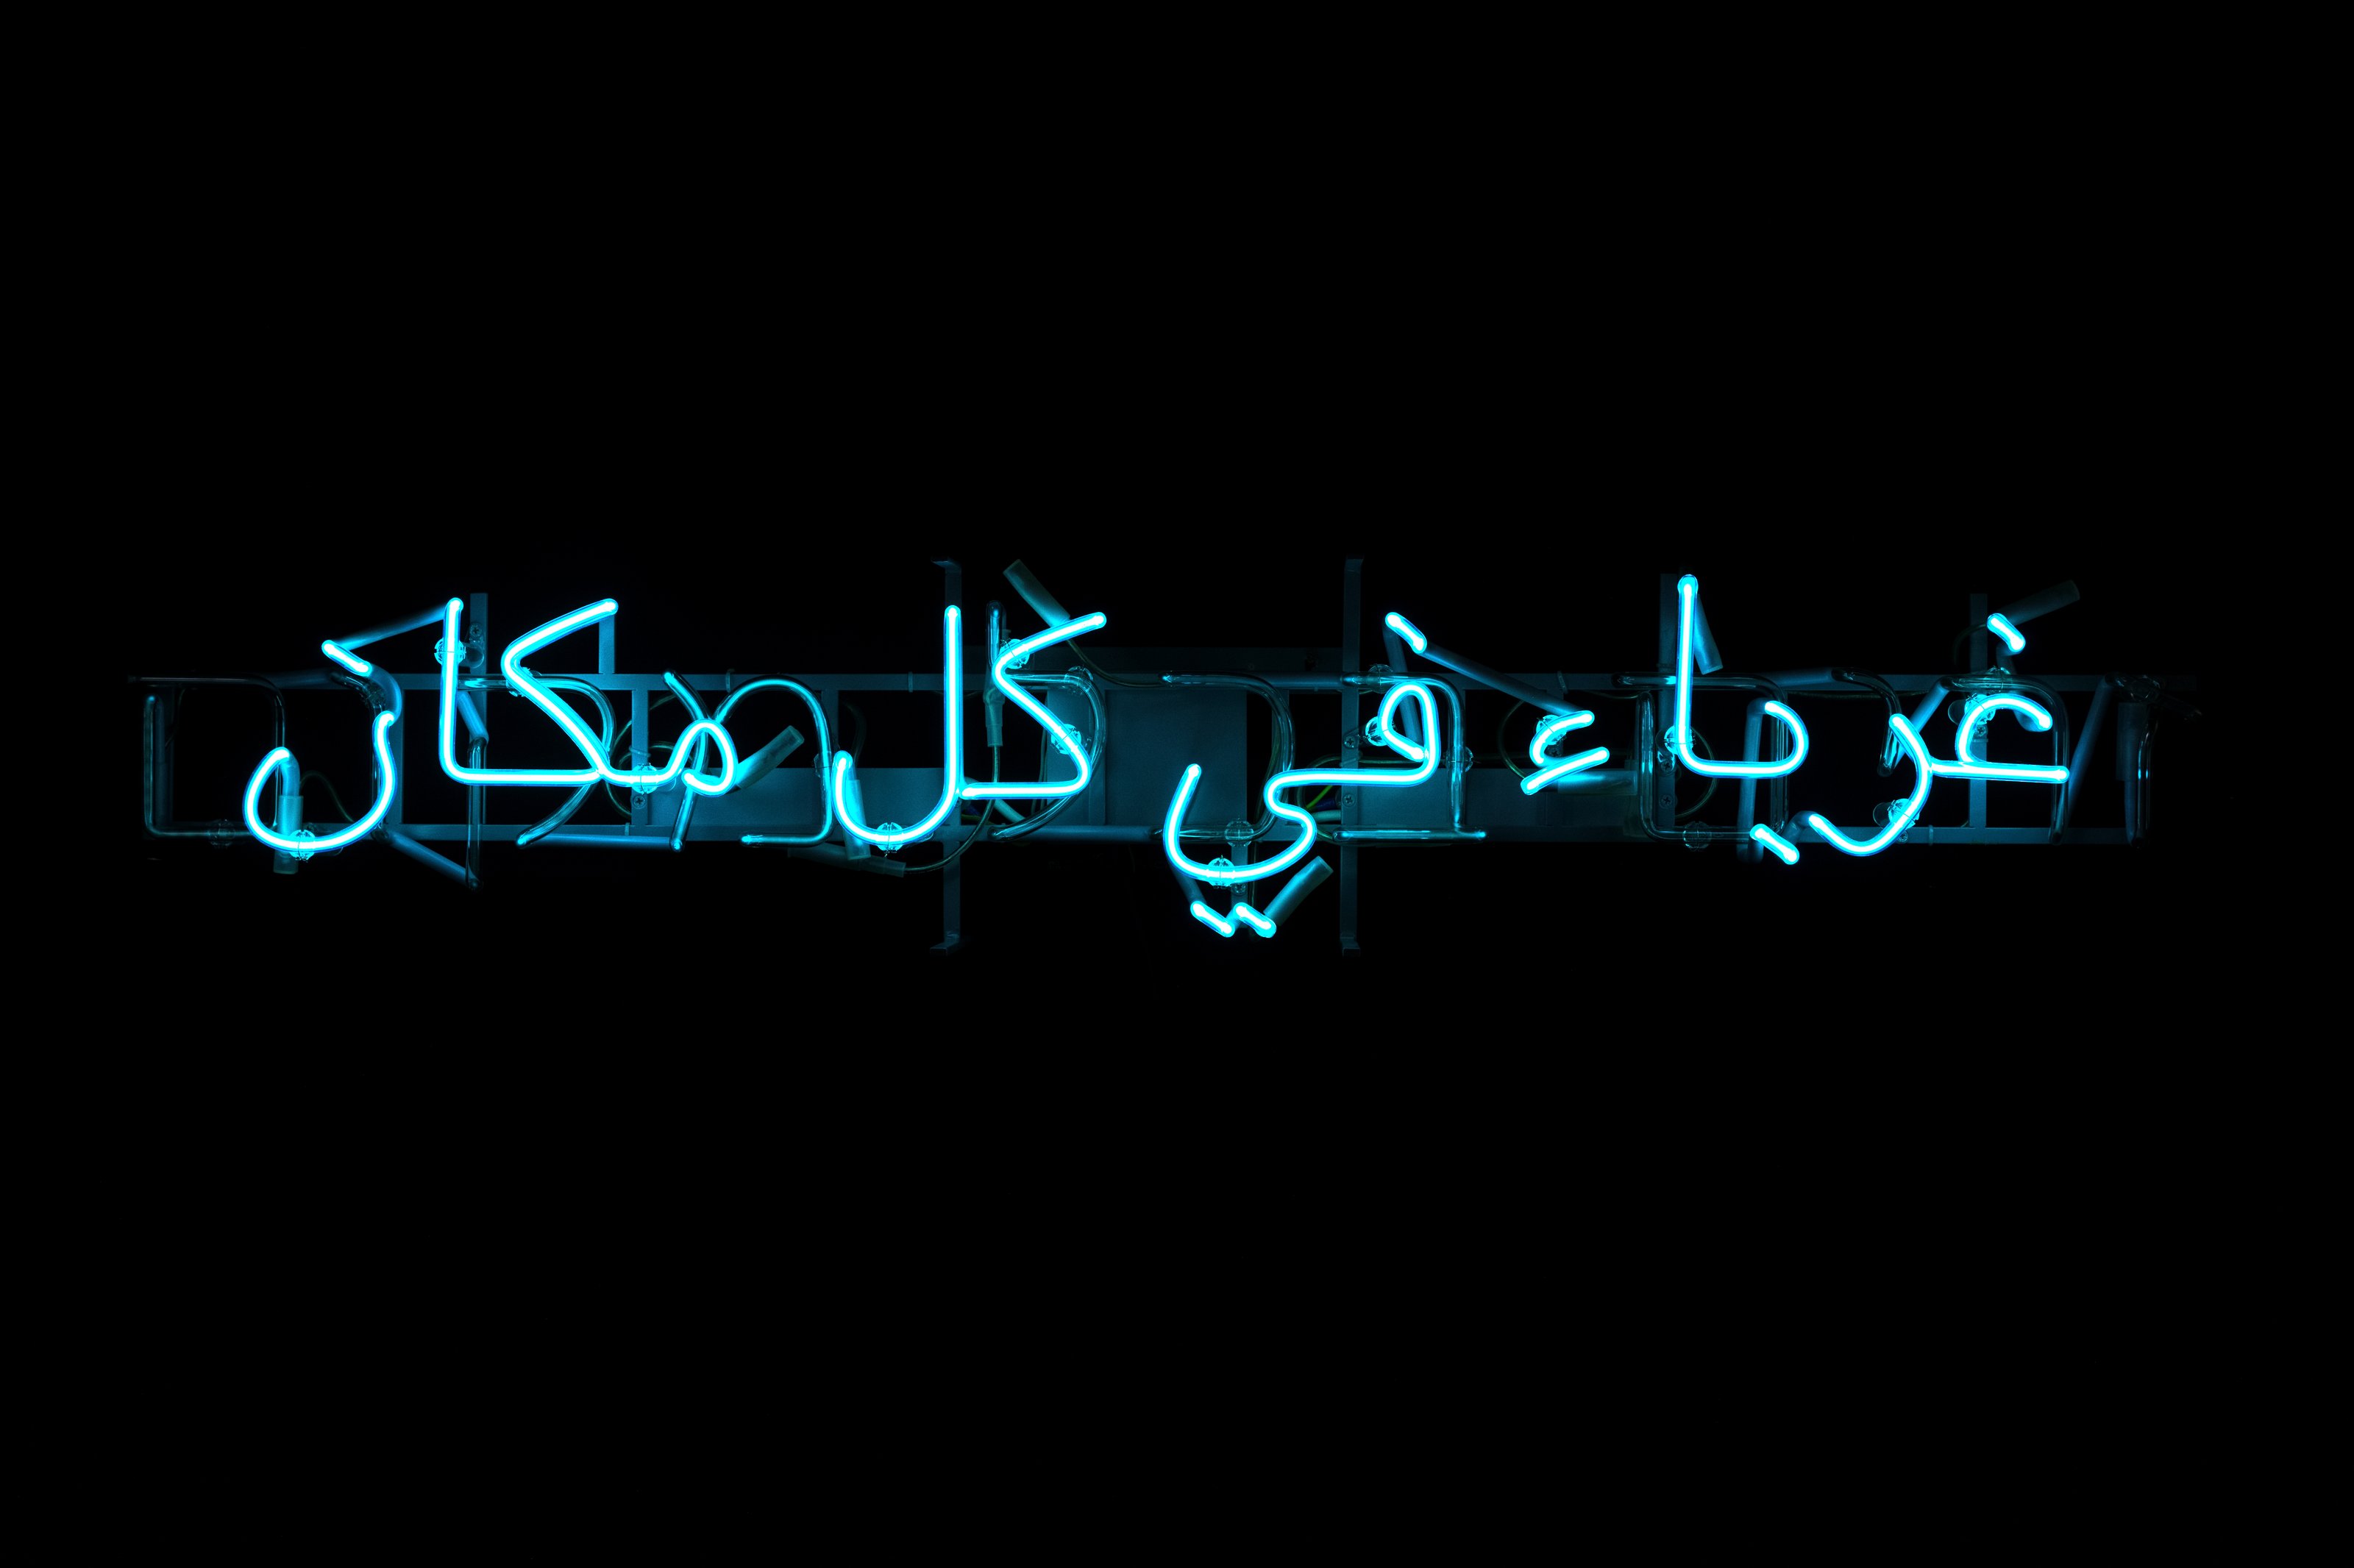 Neon blue text "Foreigners Everywhere" in Arabic part of Claire Fontaine's "Foreigners Everywhere, 2010" artwork.